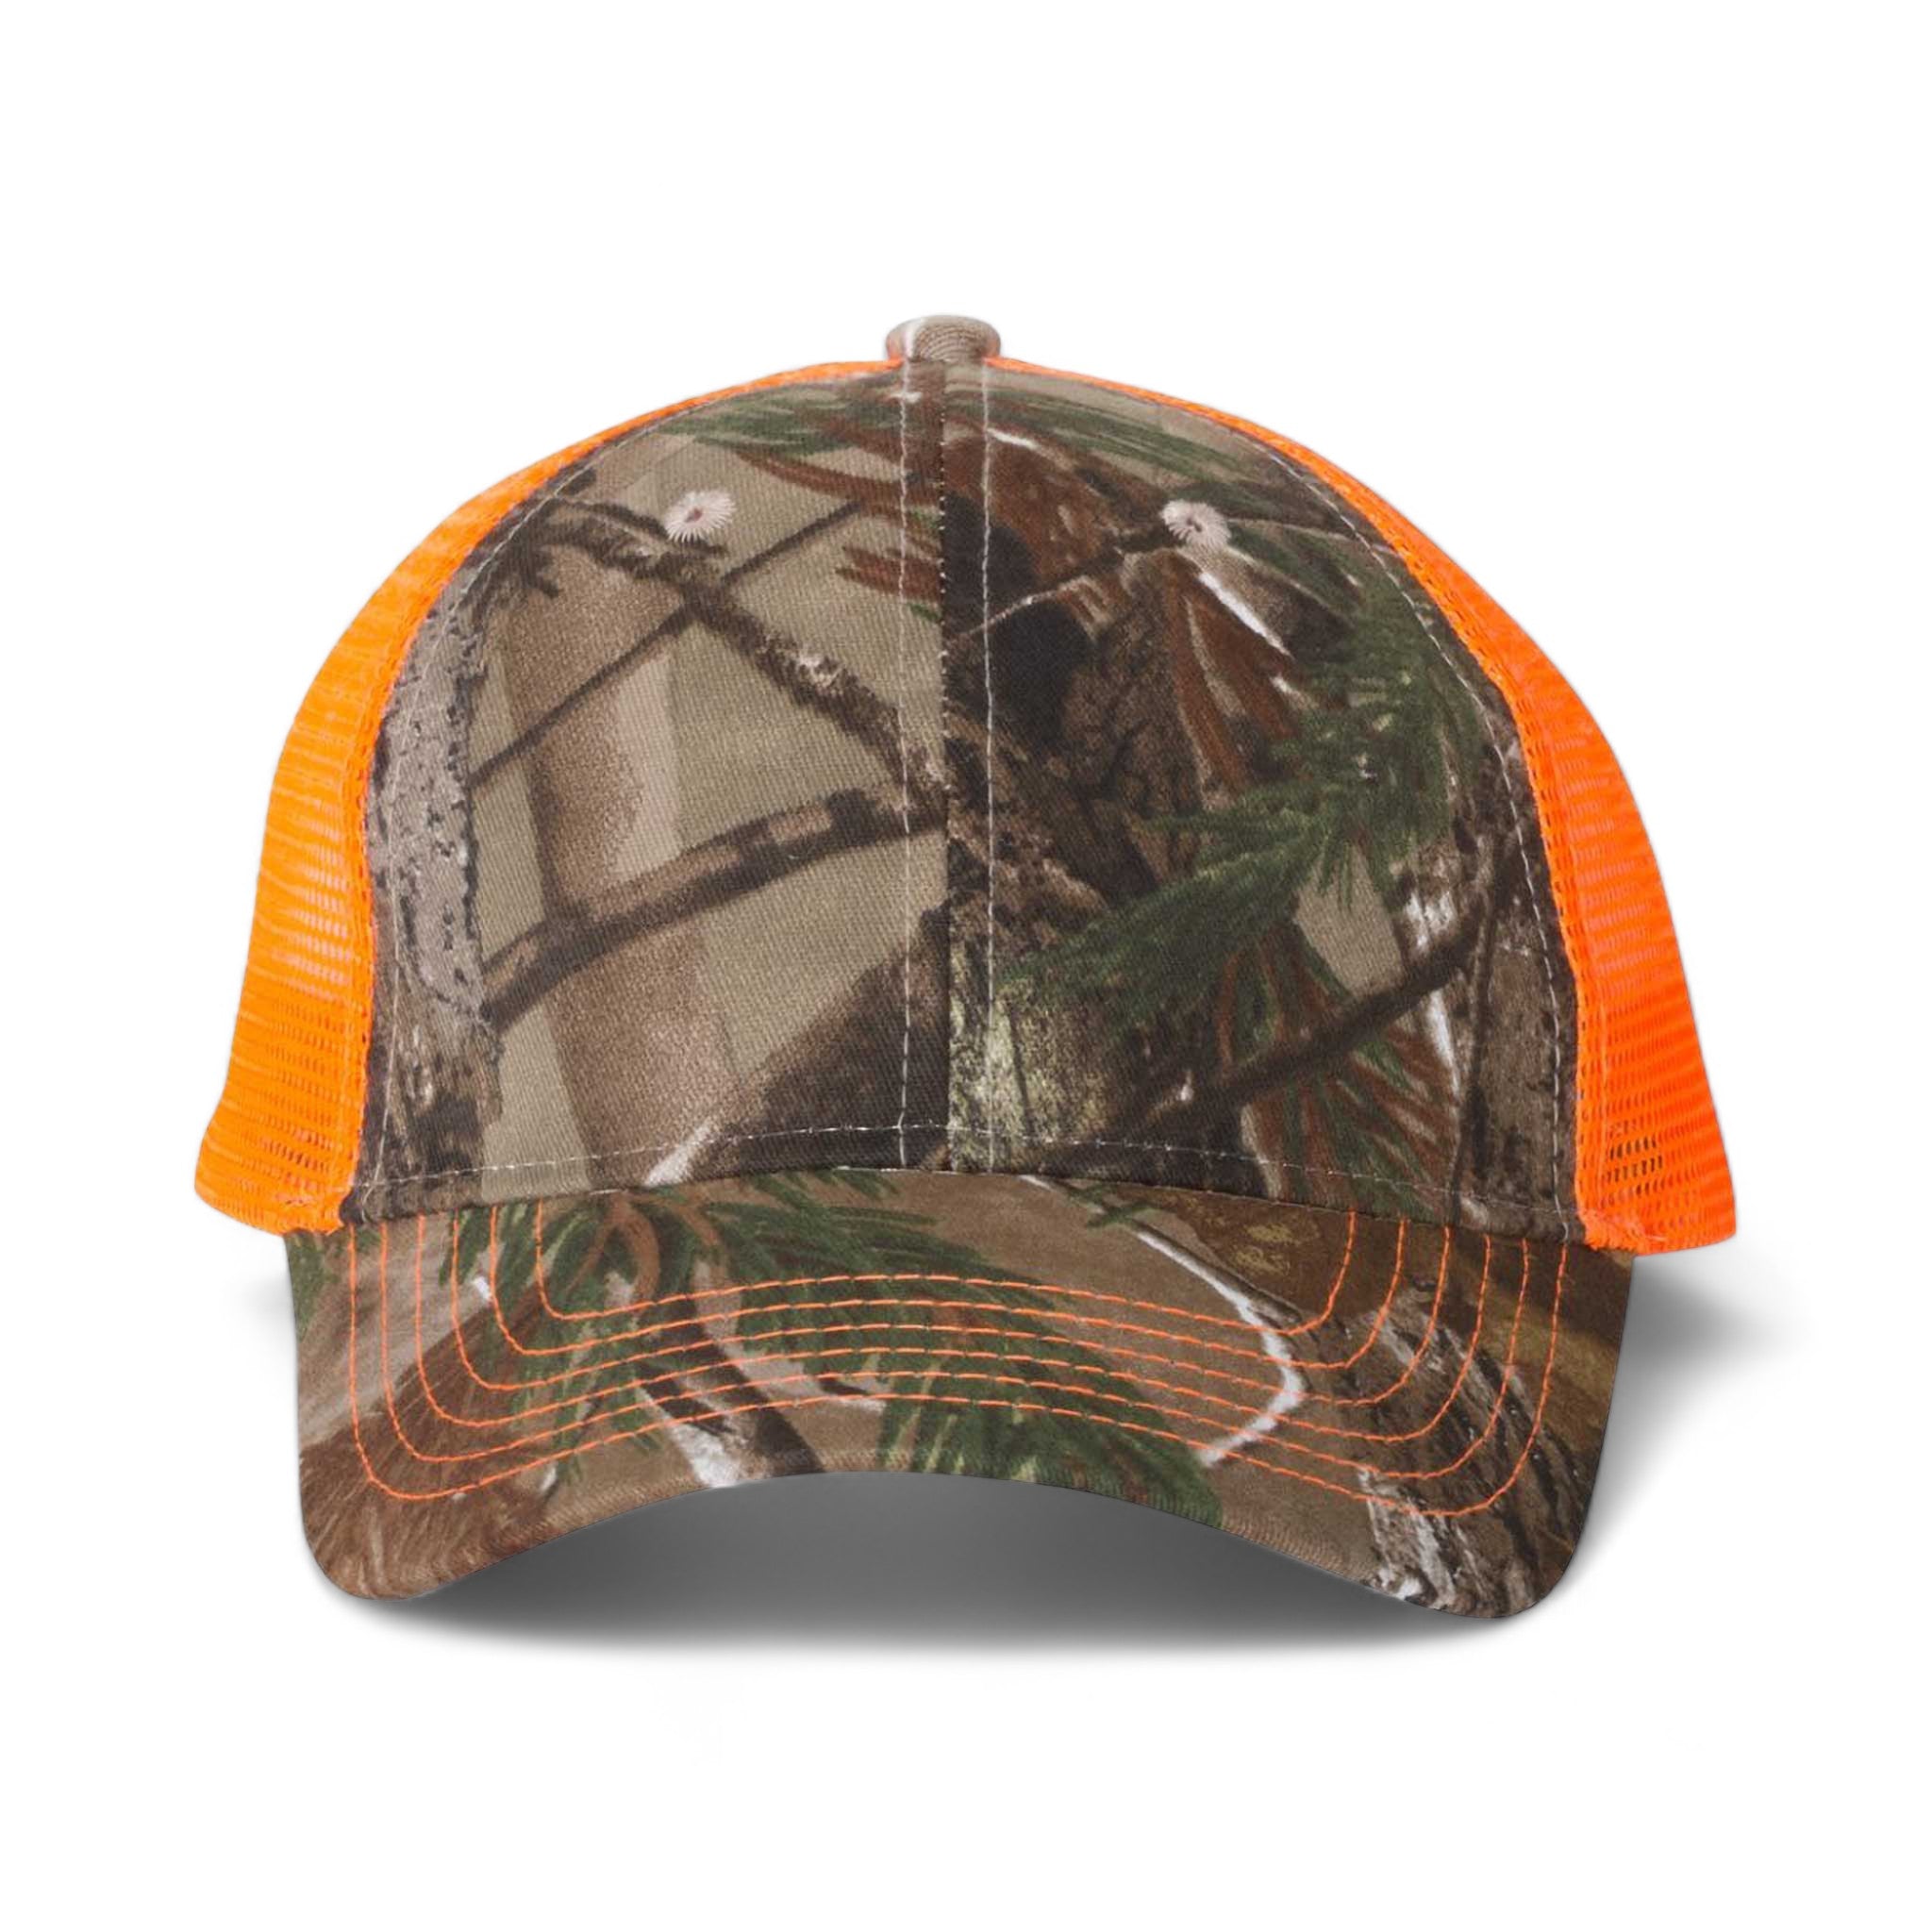 Front view of Kati LC5M custom hat in realtree ap and neon orange